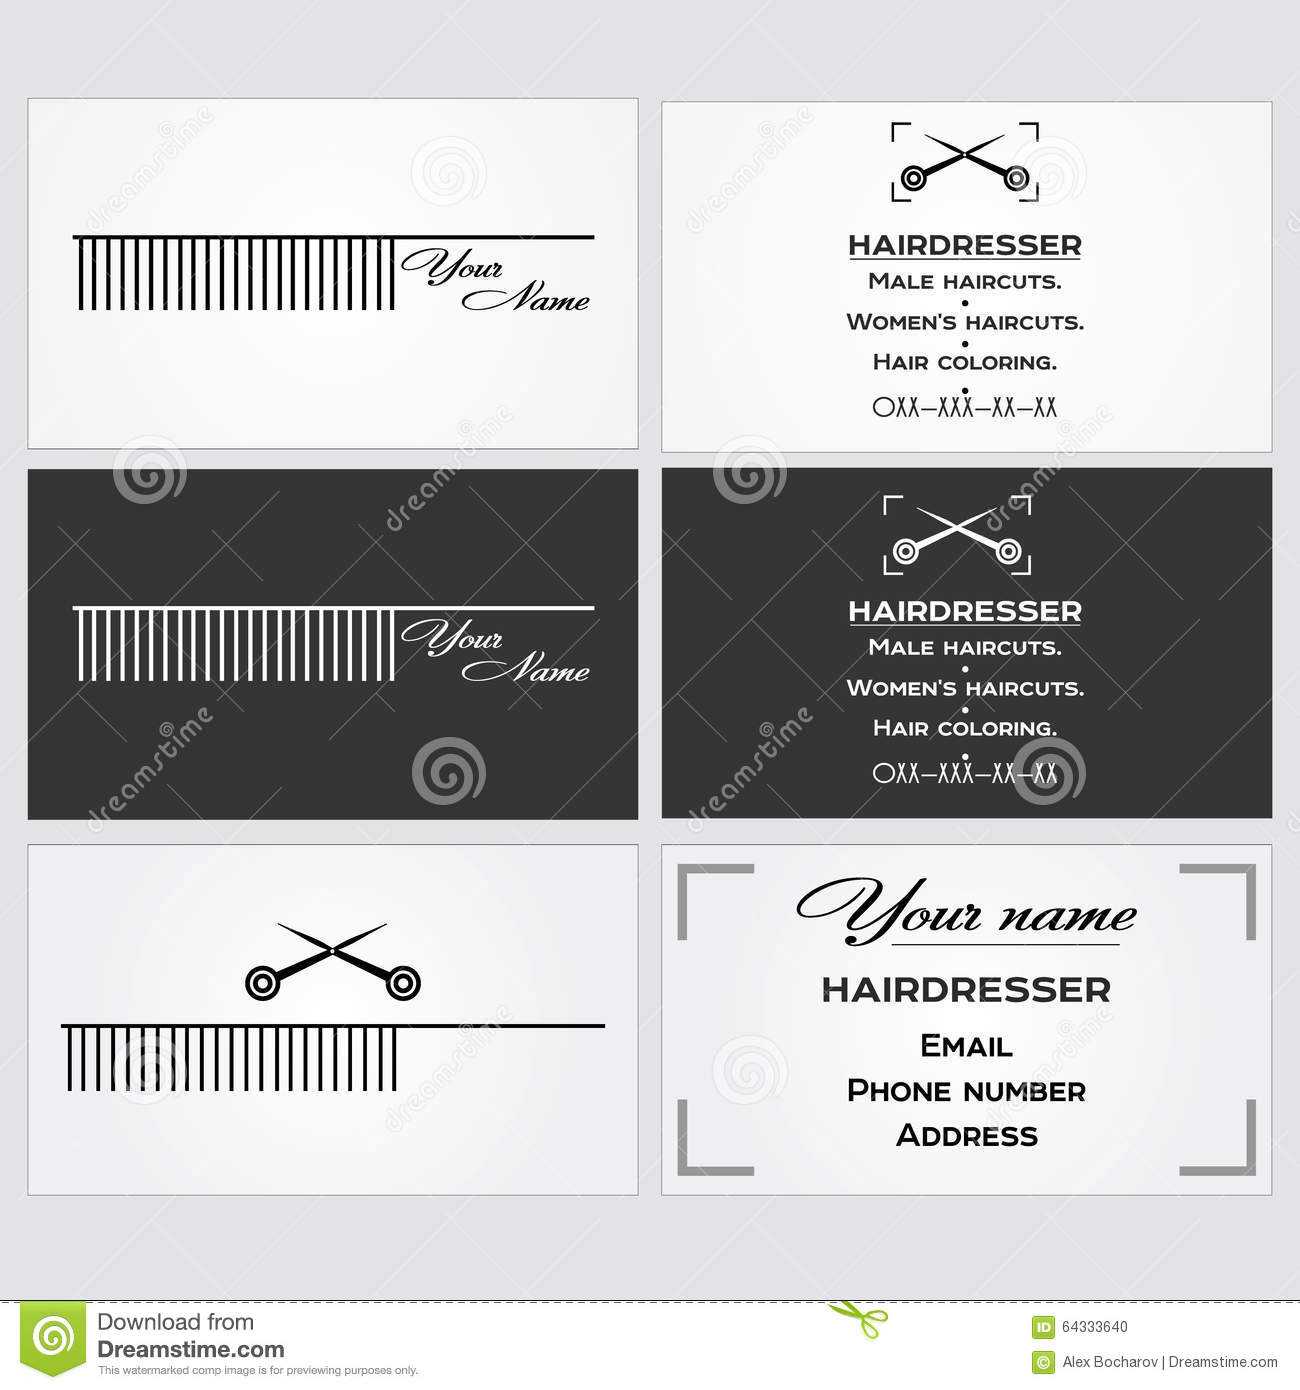 Business Card Template For A Hairdresser. Stock Vector Throughout Hairdresser Business Card Templates Free